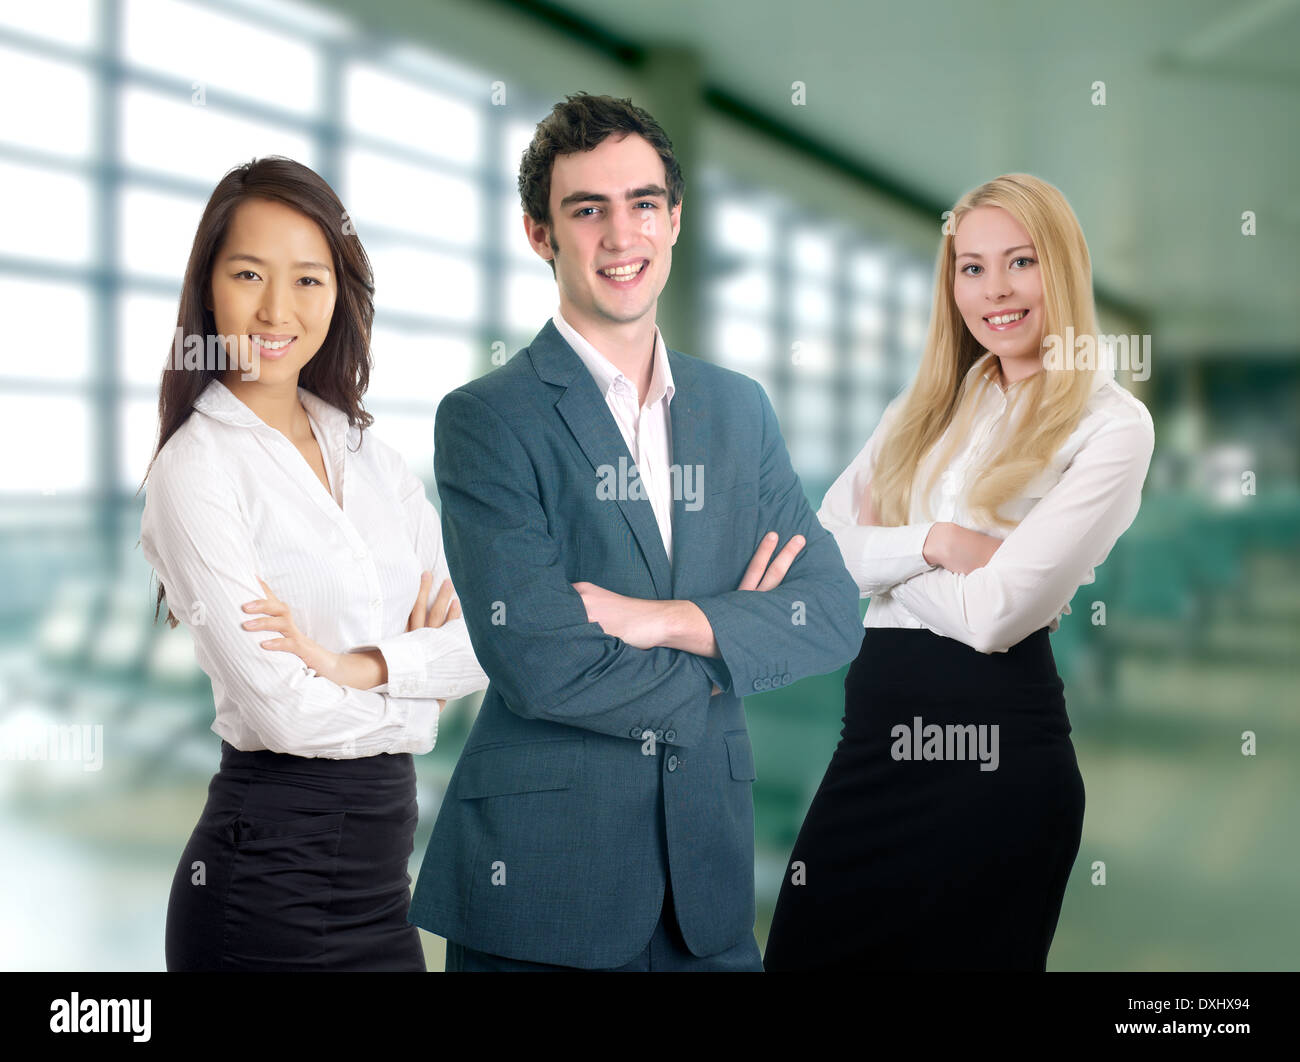 Formal business professionals crossing arms pose in the commercial building Stock Photo